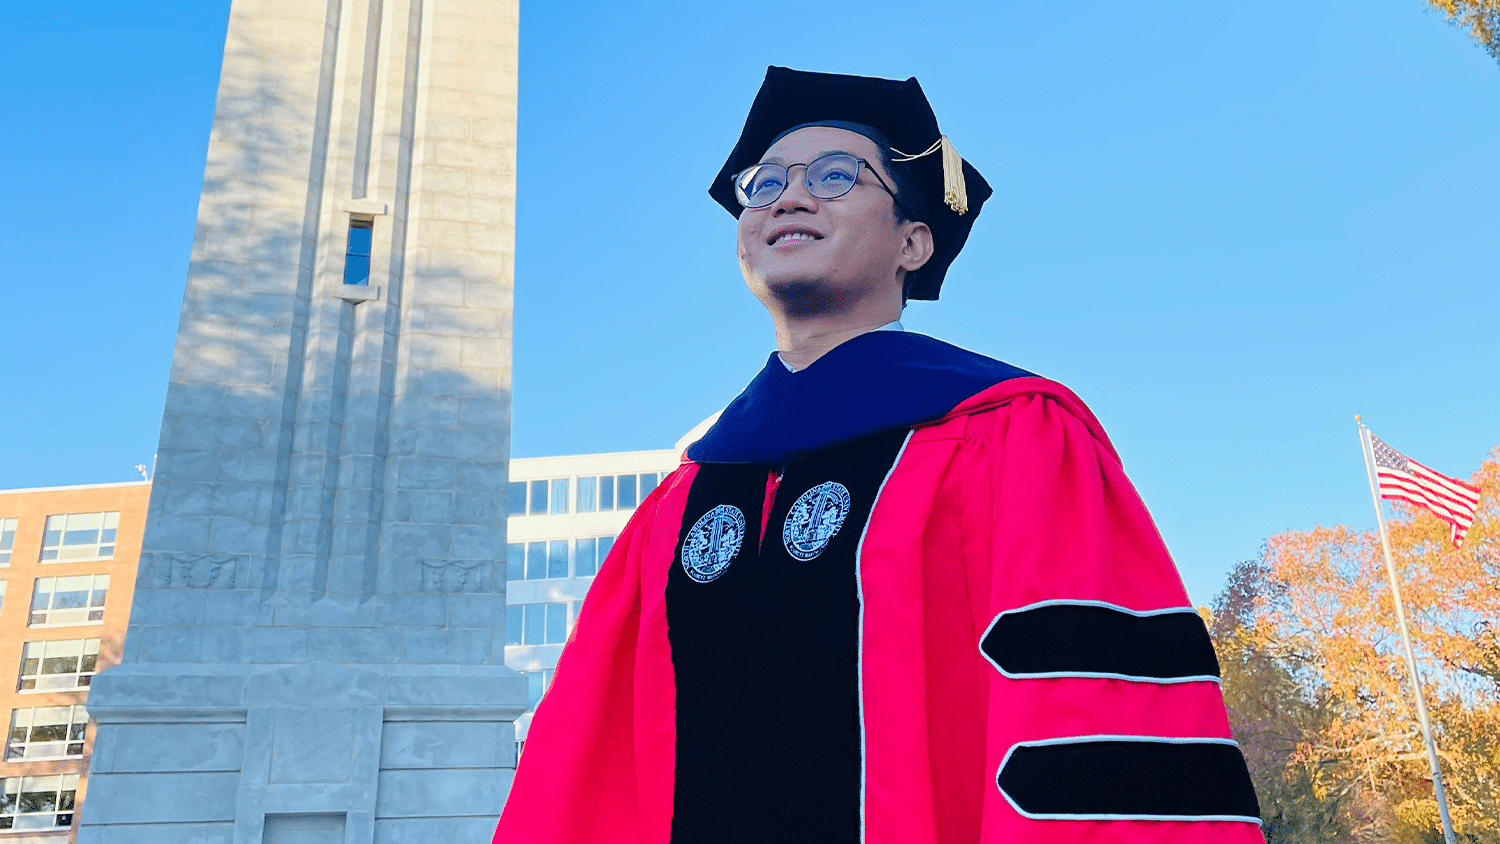 Arif Rachmatullah stands in front of the Belltower in his doctoral robe